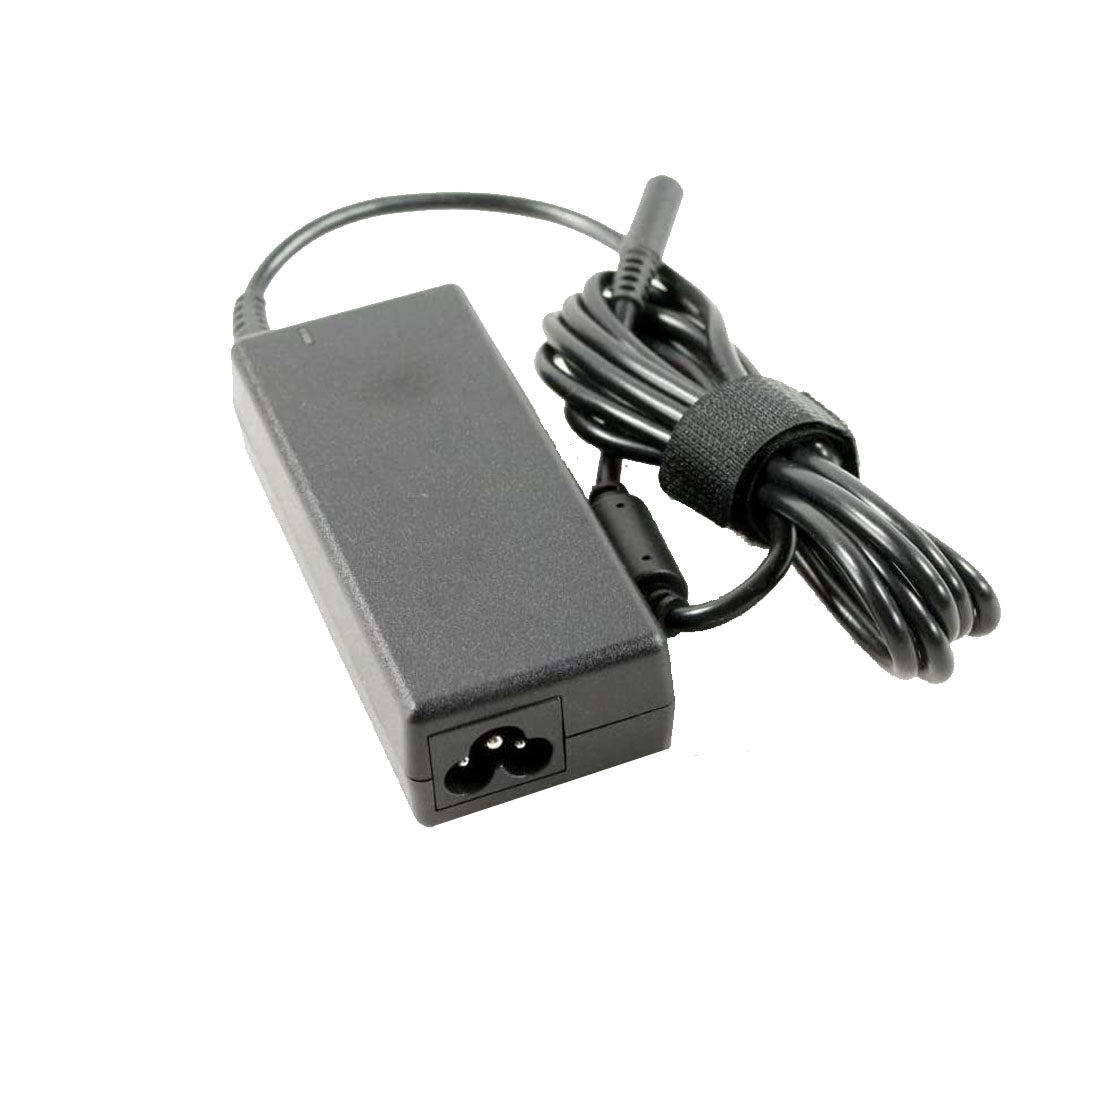 Dell Original 65W 19.5V 4.5mm Pin Laptop Charger Adapter for Inspiron 17 5765 With Power Cord